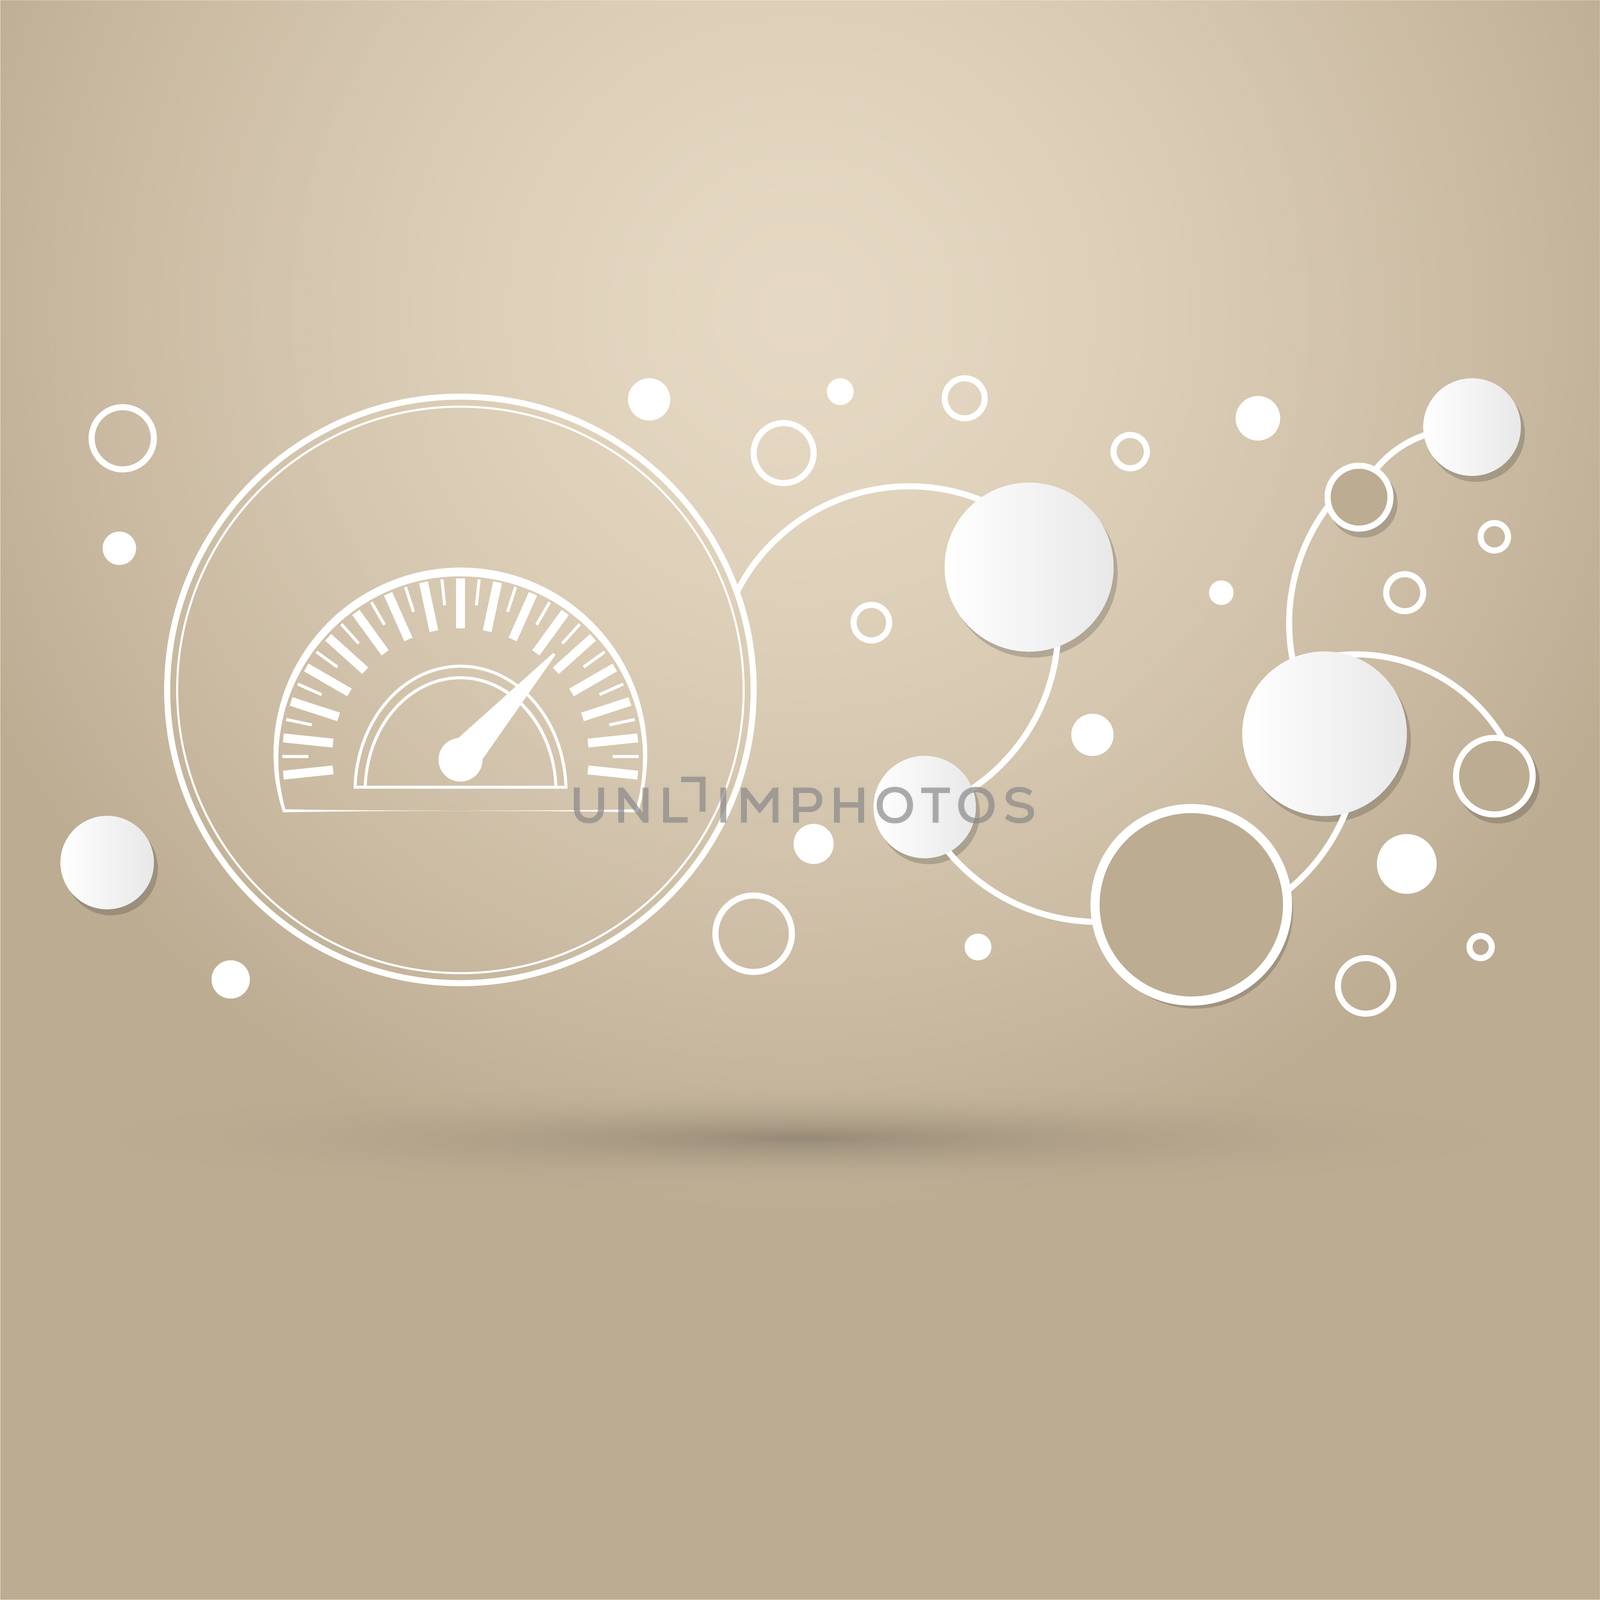 Speedometer icon on a brown background with elegant style and modern design infographic. illustration